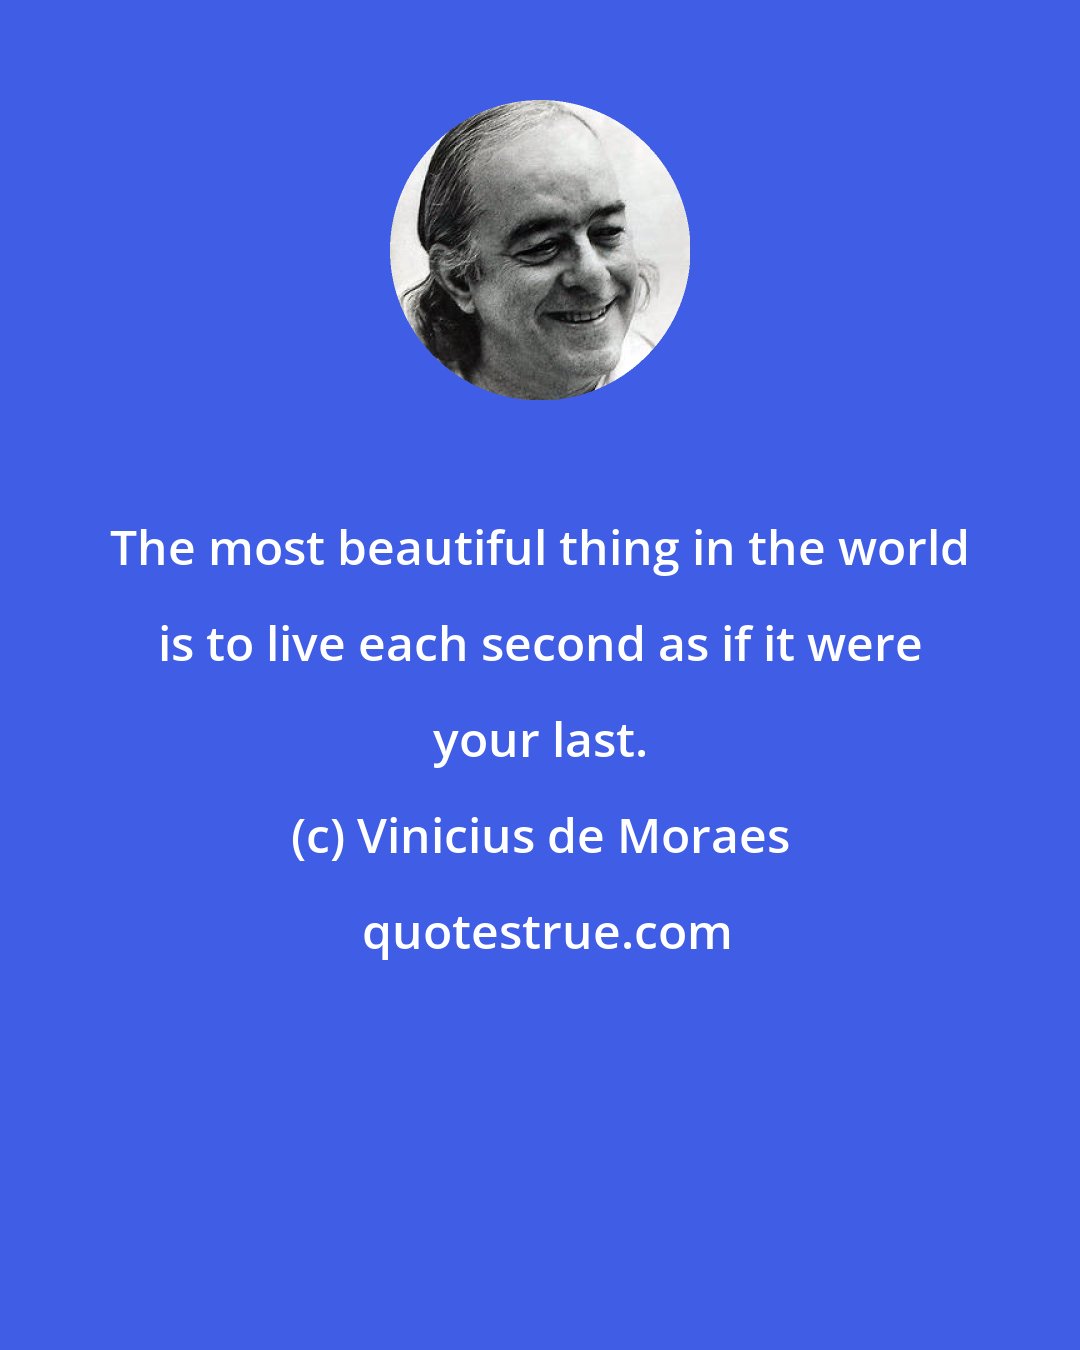 Vinicius de Moraes: The most beautiful thing in the world is to live each second as if it were your last.